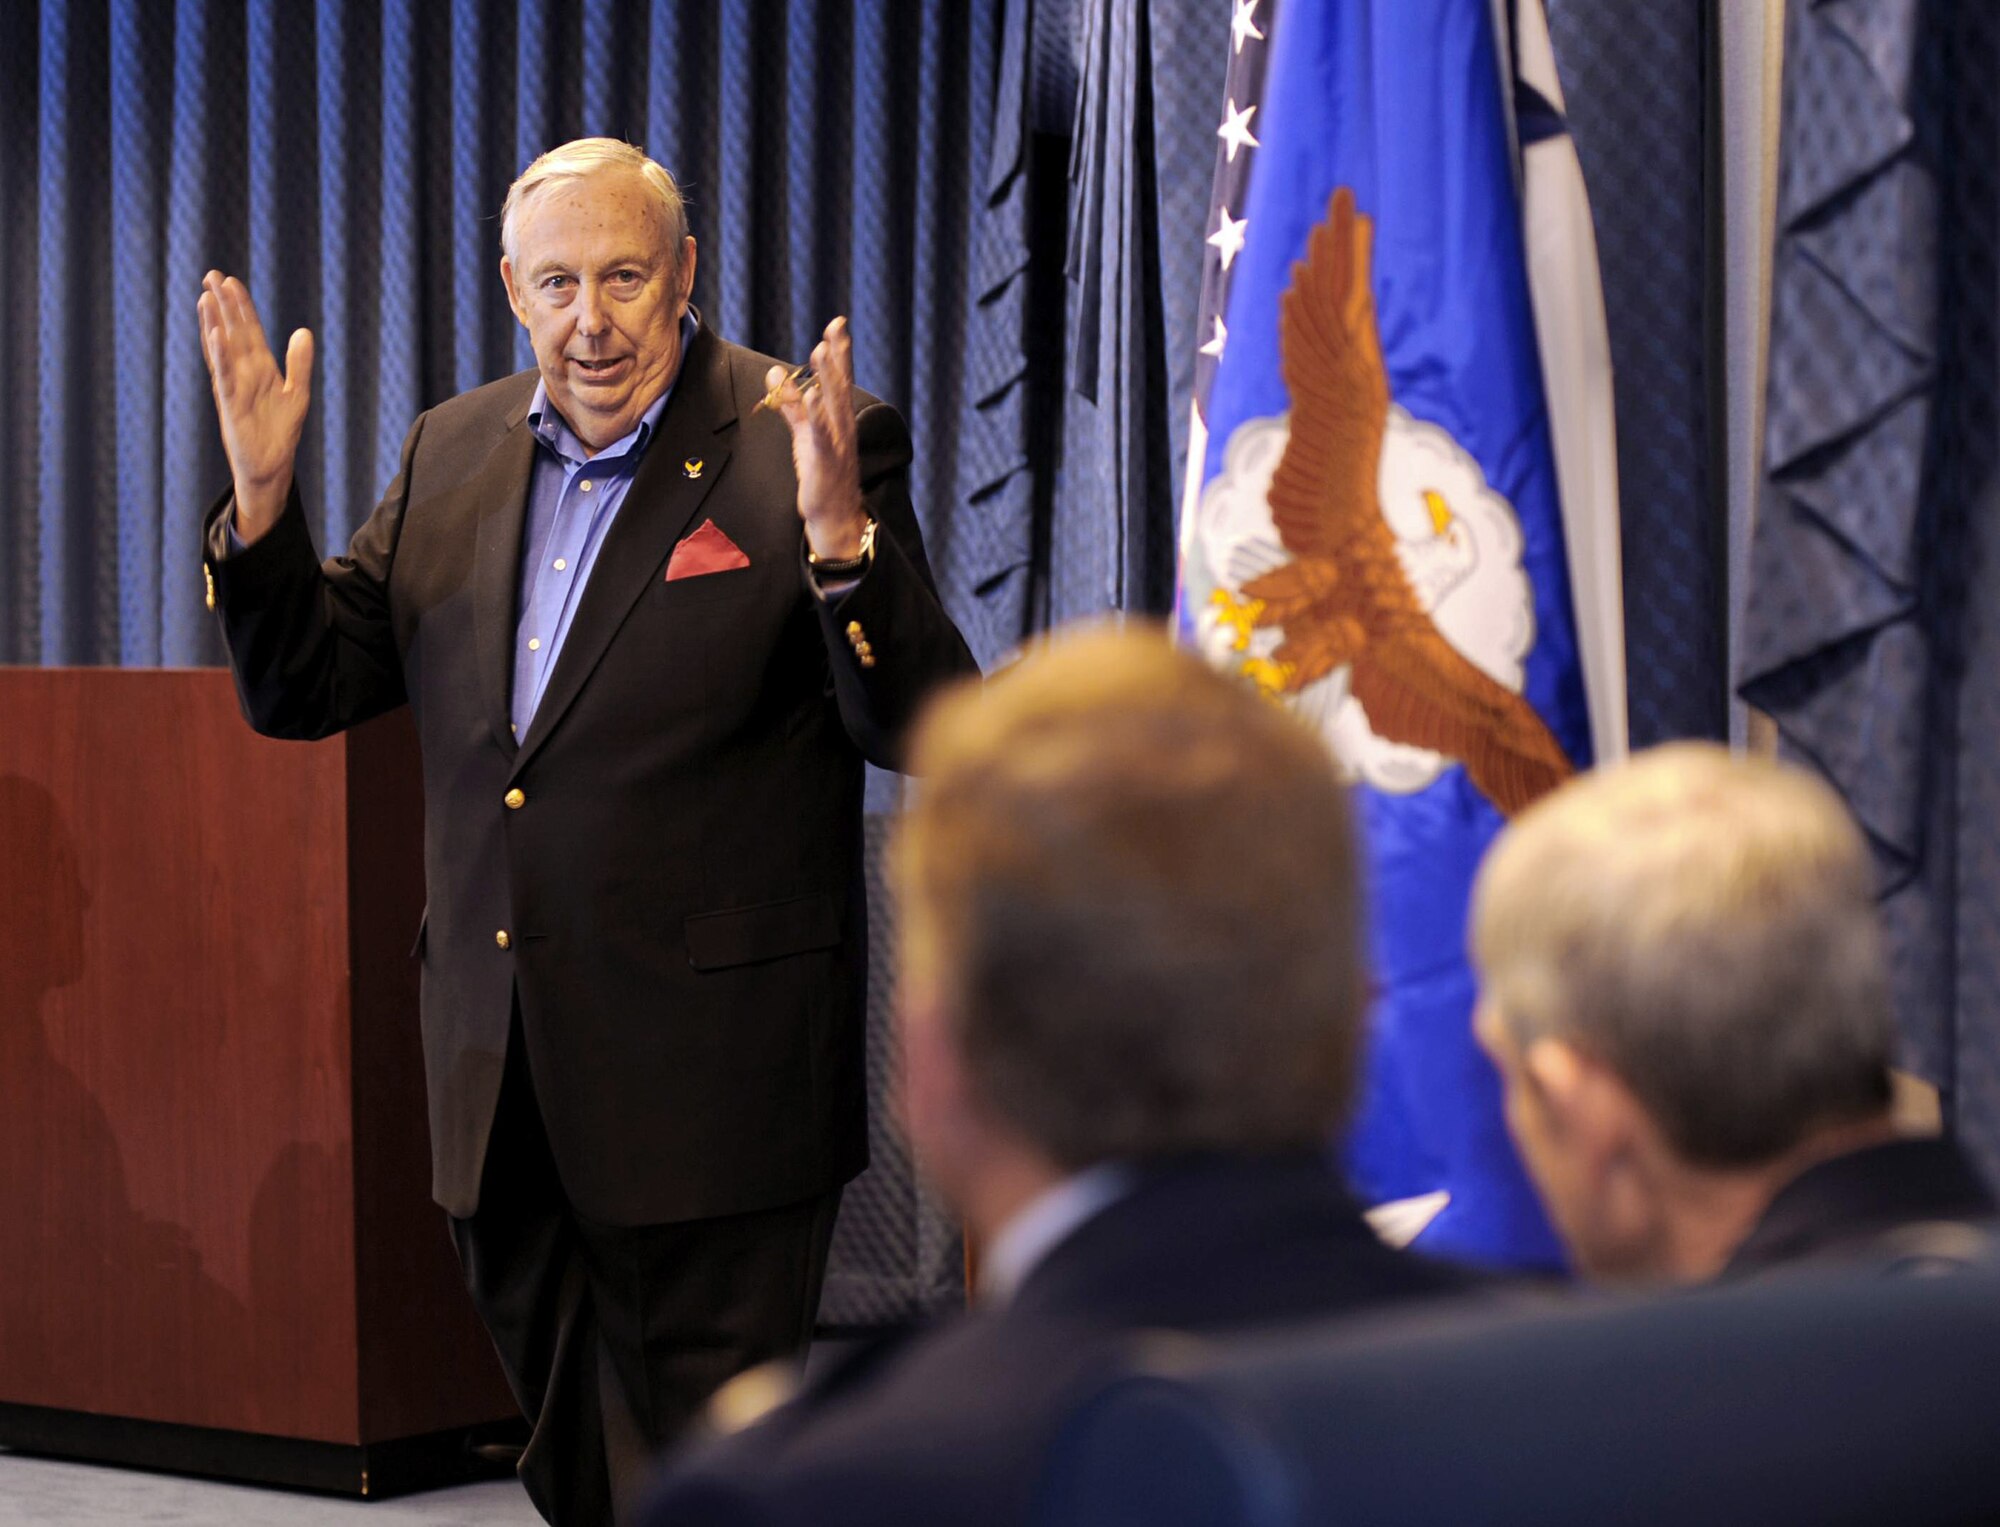 Dr. James G. Roche, former Secretary of the Air Force, speaks before the presentation of an award named in his honor at a ceremony at the Pentagon on April 11, 2011.  The B-2 Division at Wright-Patterson Air Force Base, Ohio, won the 2010 Dr. James G. Roche Sustainment Excellence Award for demonstrating the most improved performance in aircraft maintenance and logistics readiness. (U.S. Air Force photo/Andy Morataya)
